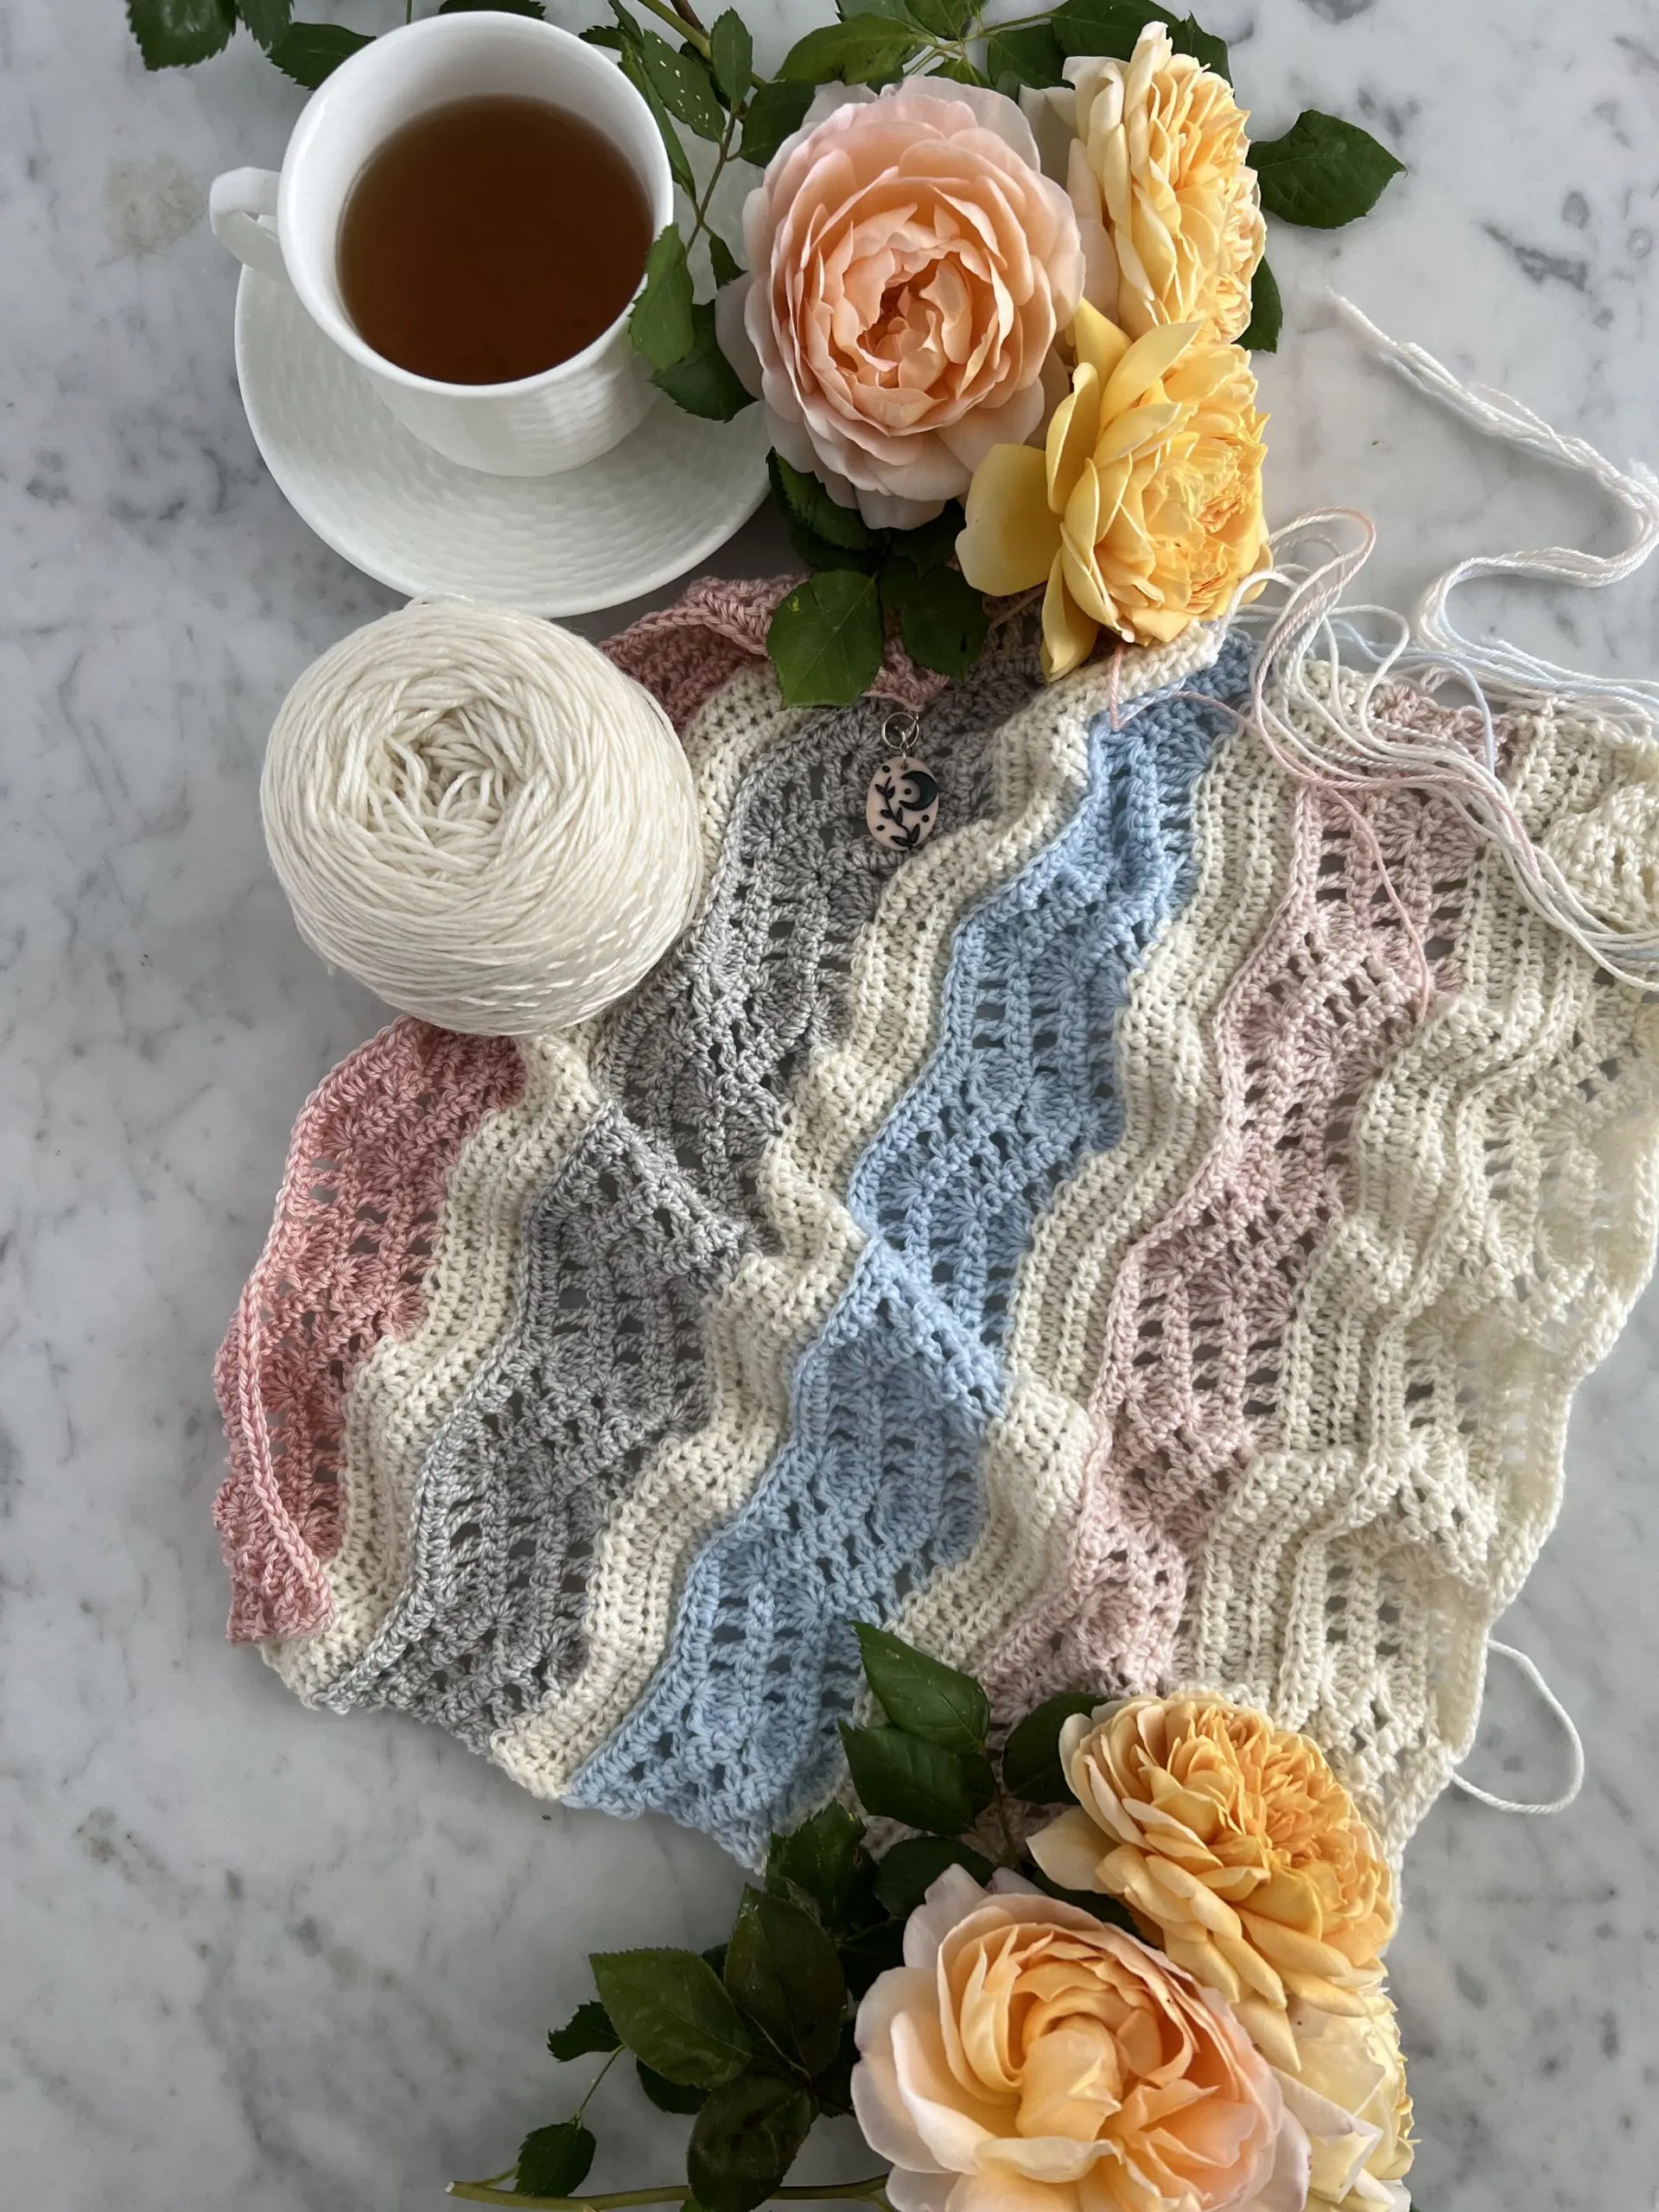 A ripply crocheted wrap in progress. It has stripes in shades of cream, pink, blue, and gray. There are also orangey-yellow roses and a white teacup full of tea.